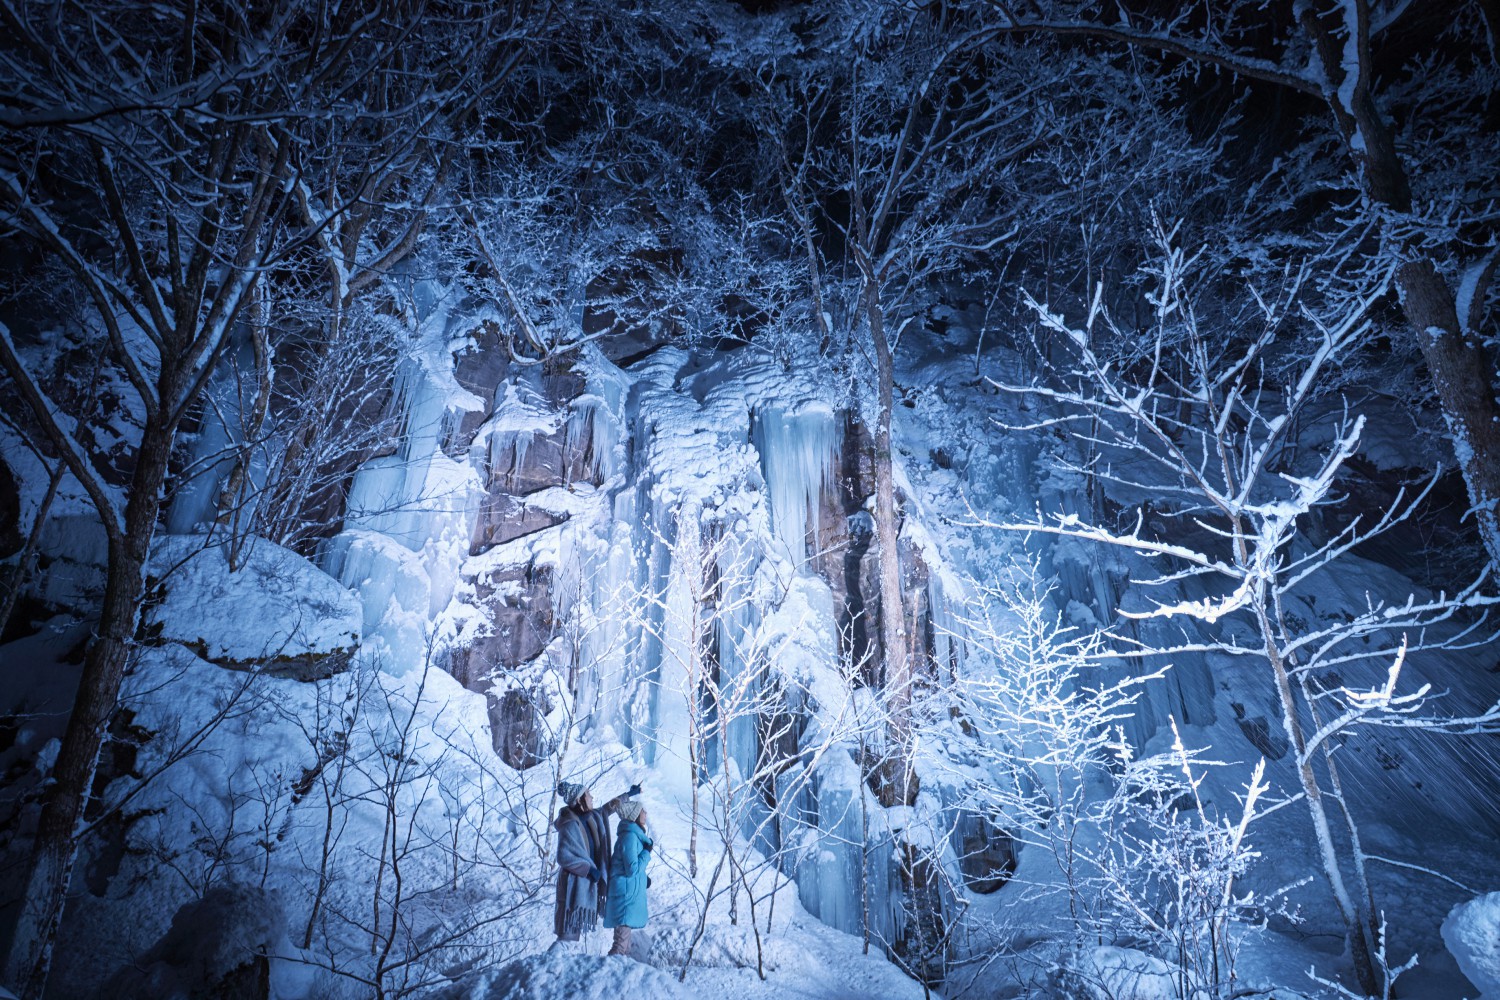 Take the shuttle bus to the Oirase Gorge at night.Admire the icefalls and icicles lit up at three locations: Makado Rock, Chisuji Falls, and Samidare no Nagare.The scenery that shines in the dark is fantastic, and it is like a supernatural scenery created by nature. ▶ ︎Period: Until March 2019, 3 / Time: ①17: 18-00: 19 ②00: 19-30: 20 ③30: 20-40: 21 / Adults 40 yen, Elementary school students 1,080 yen.